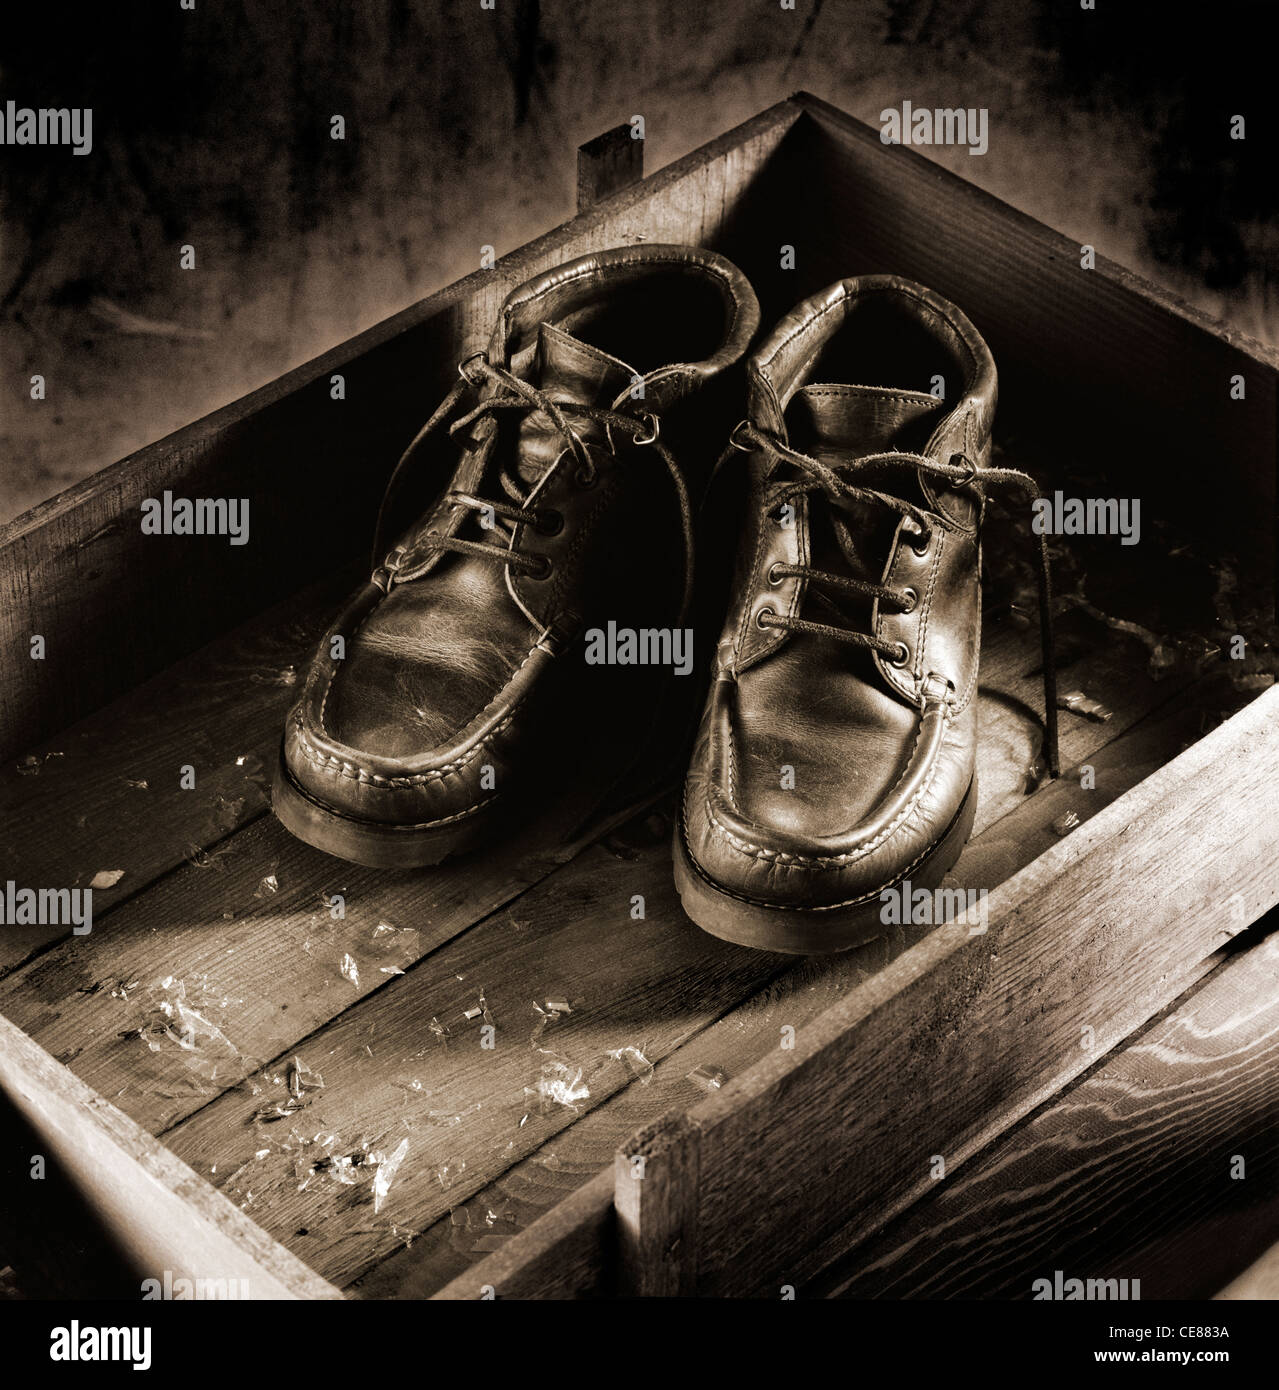 Pair of boots in a box of wood Stock Photo